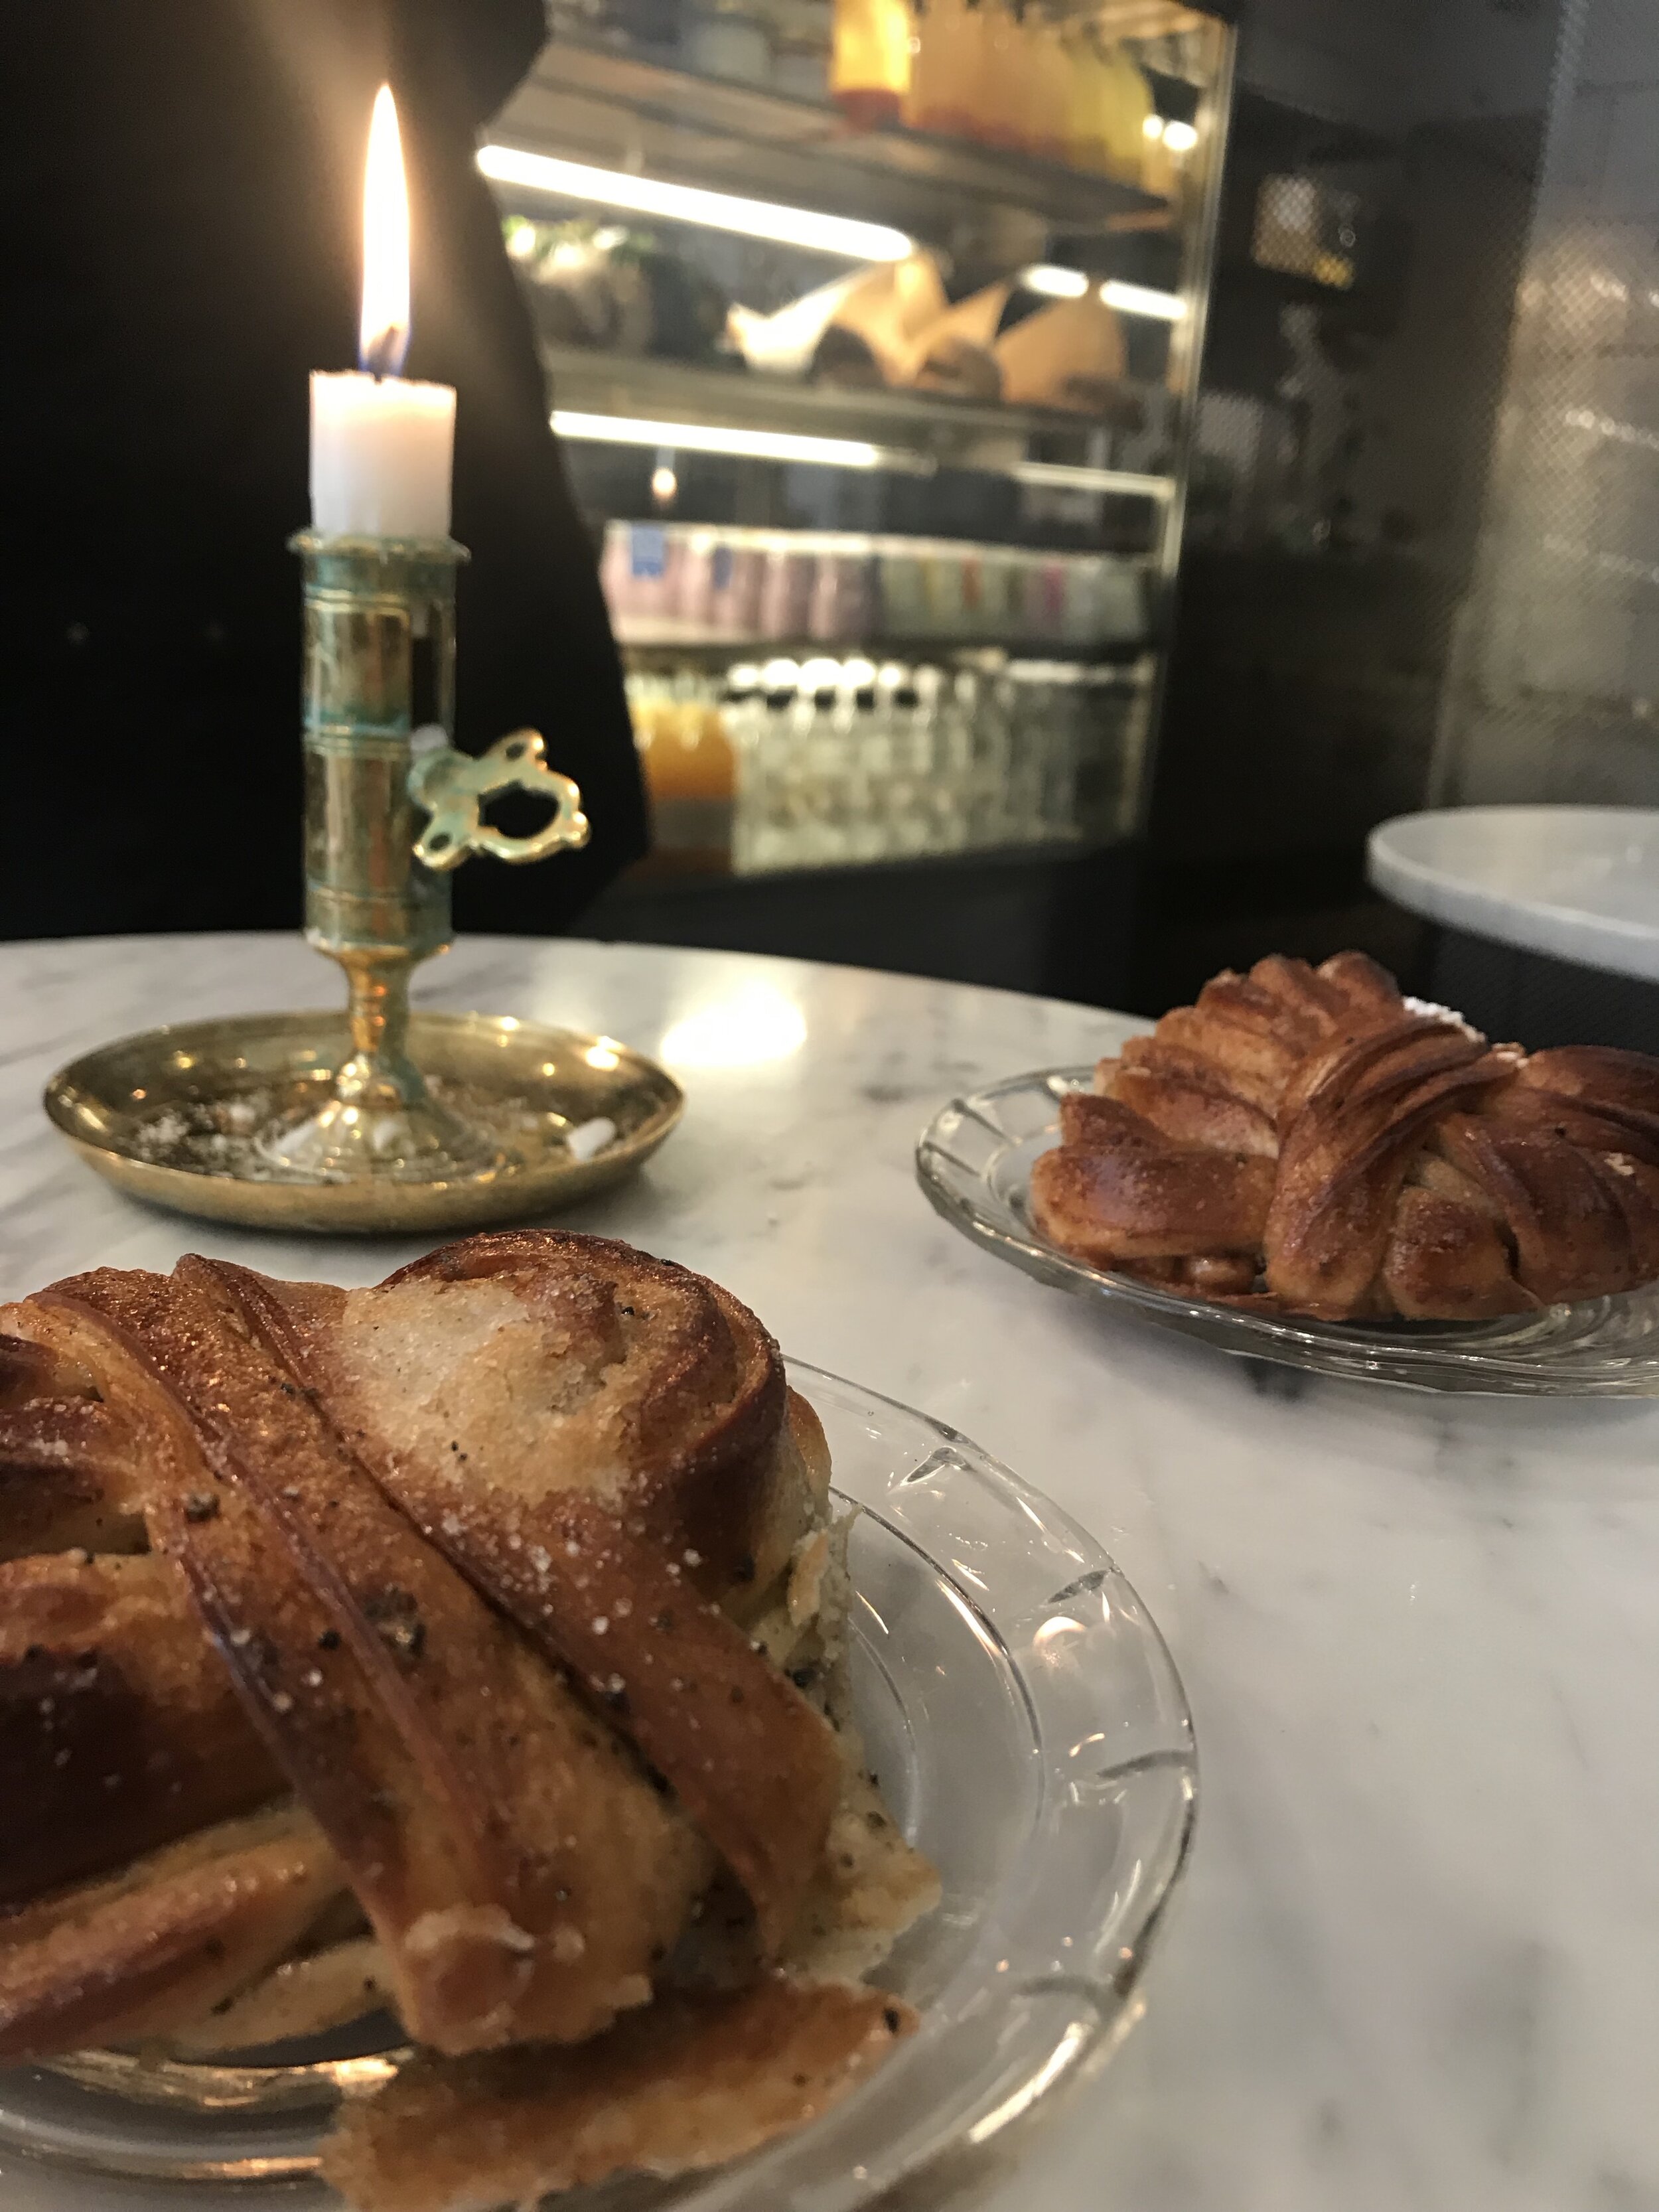 Cinnamon Rolls from Stockholm, Sweden are out of this world delicious. They invite in cozy feelings and amazing flavors. Making them one of the best traditional Desserts in Europe. 